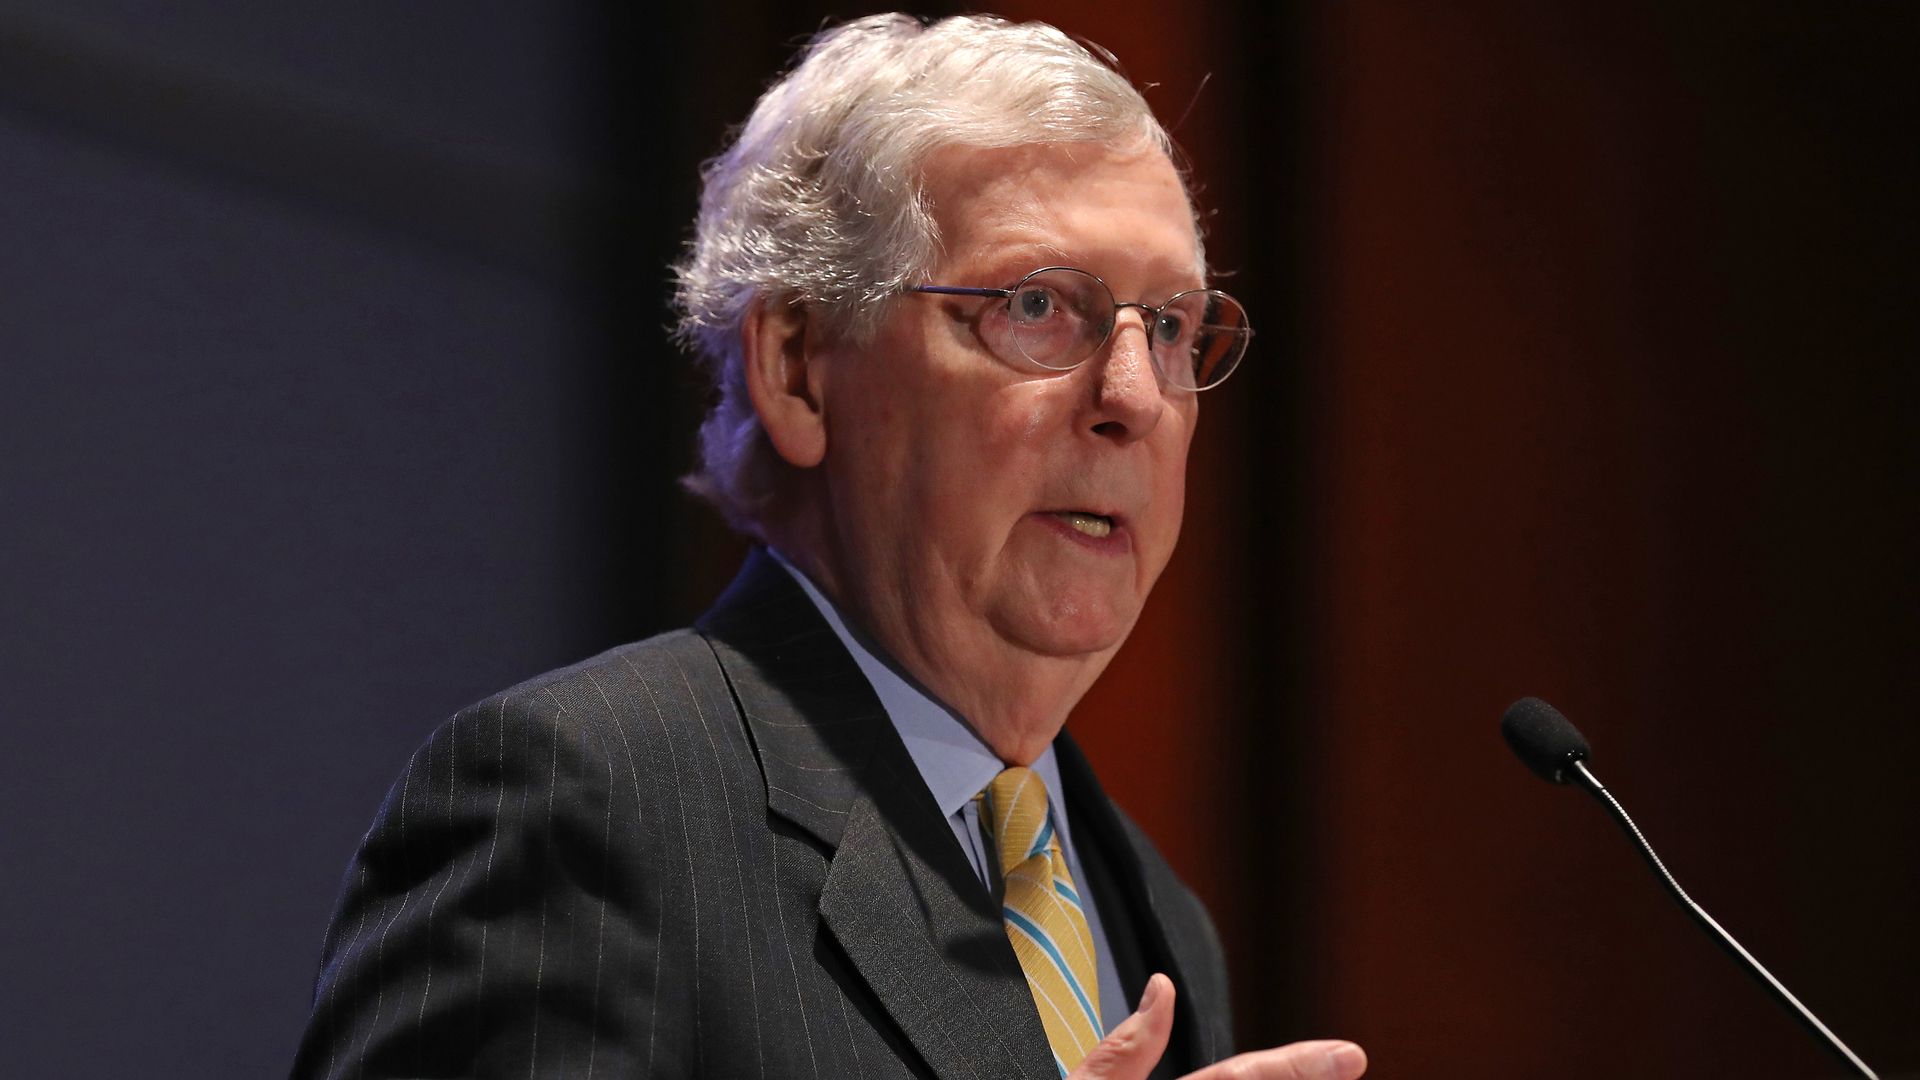 Mitch McConnell himelf.